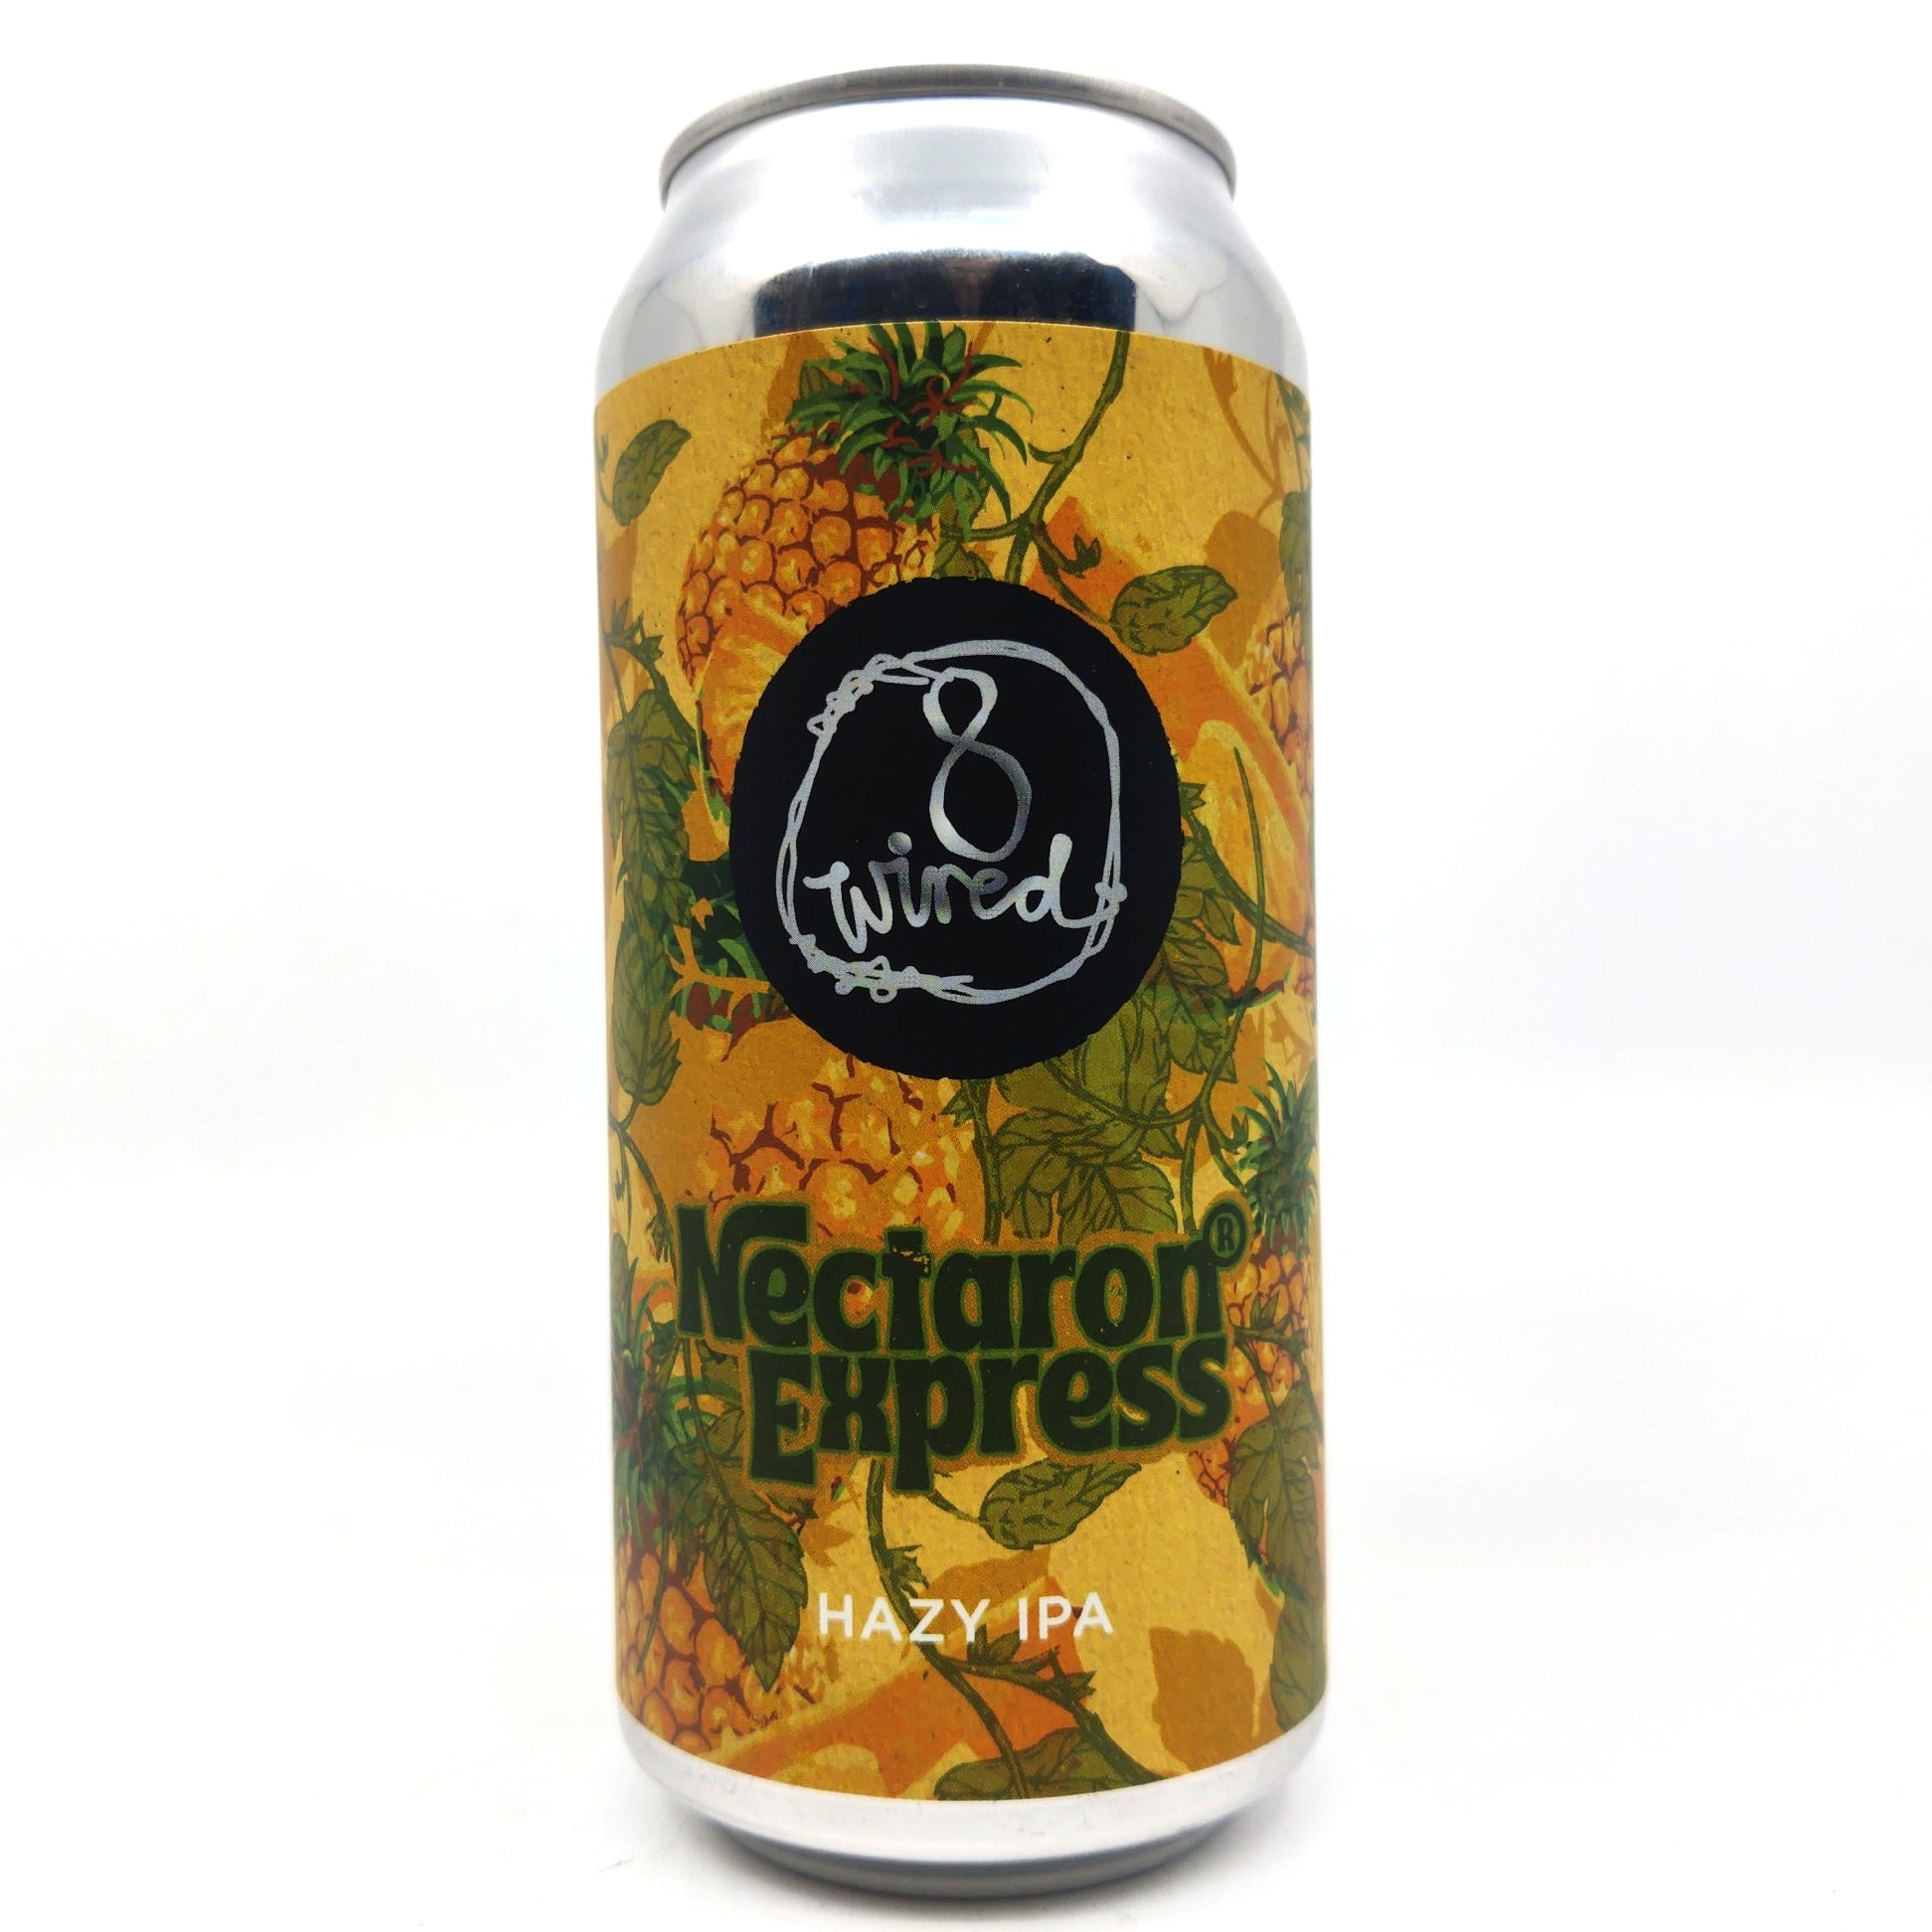 8 Wired Nectaron New England IPA 7.2% (440ml can)-Hop Burns & Black